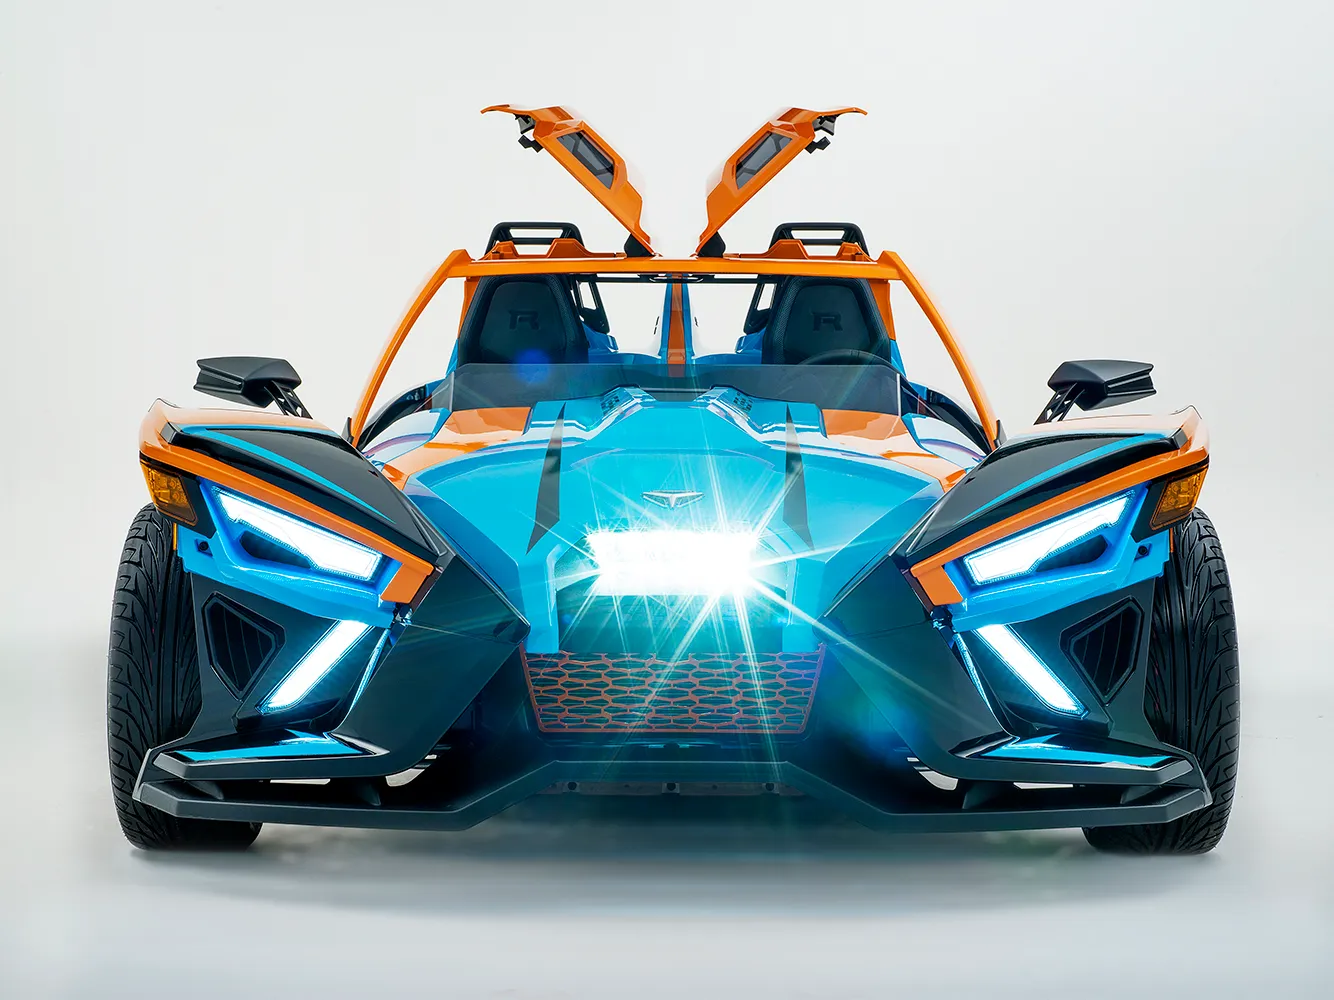 2020 Polaris Slingshot Aims To Lure In More Drivers With New AutoDrive